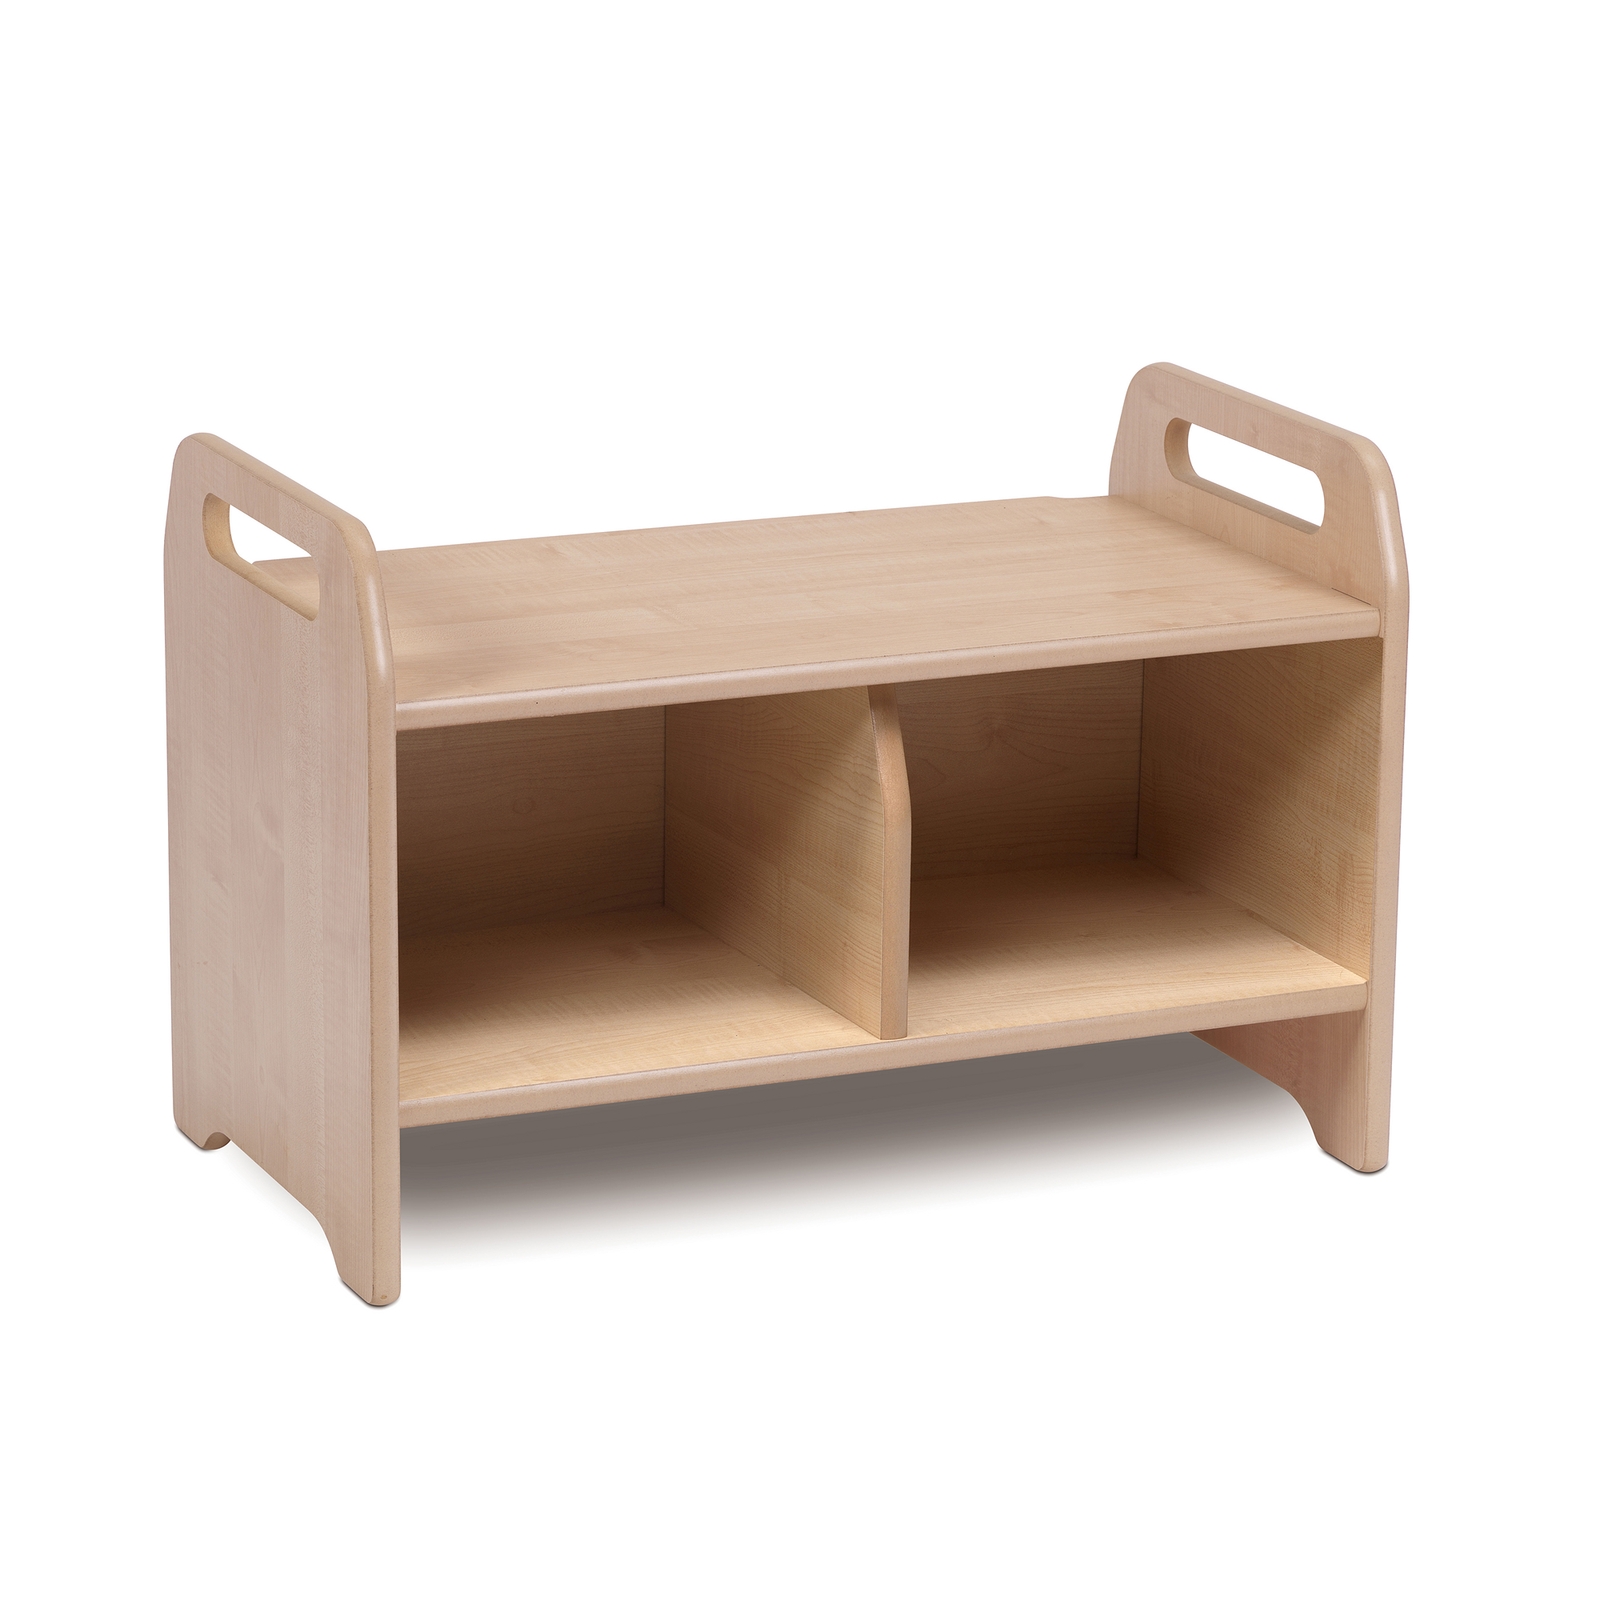 Playscapes Welcome Storage Bench - Small